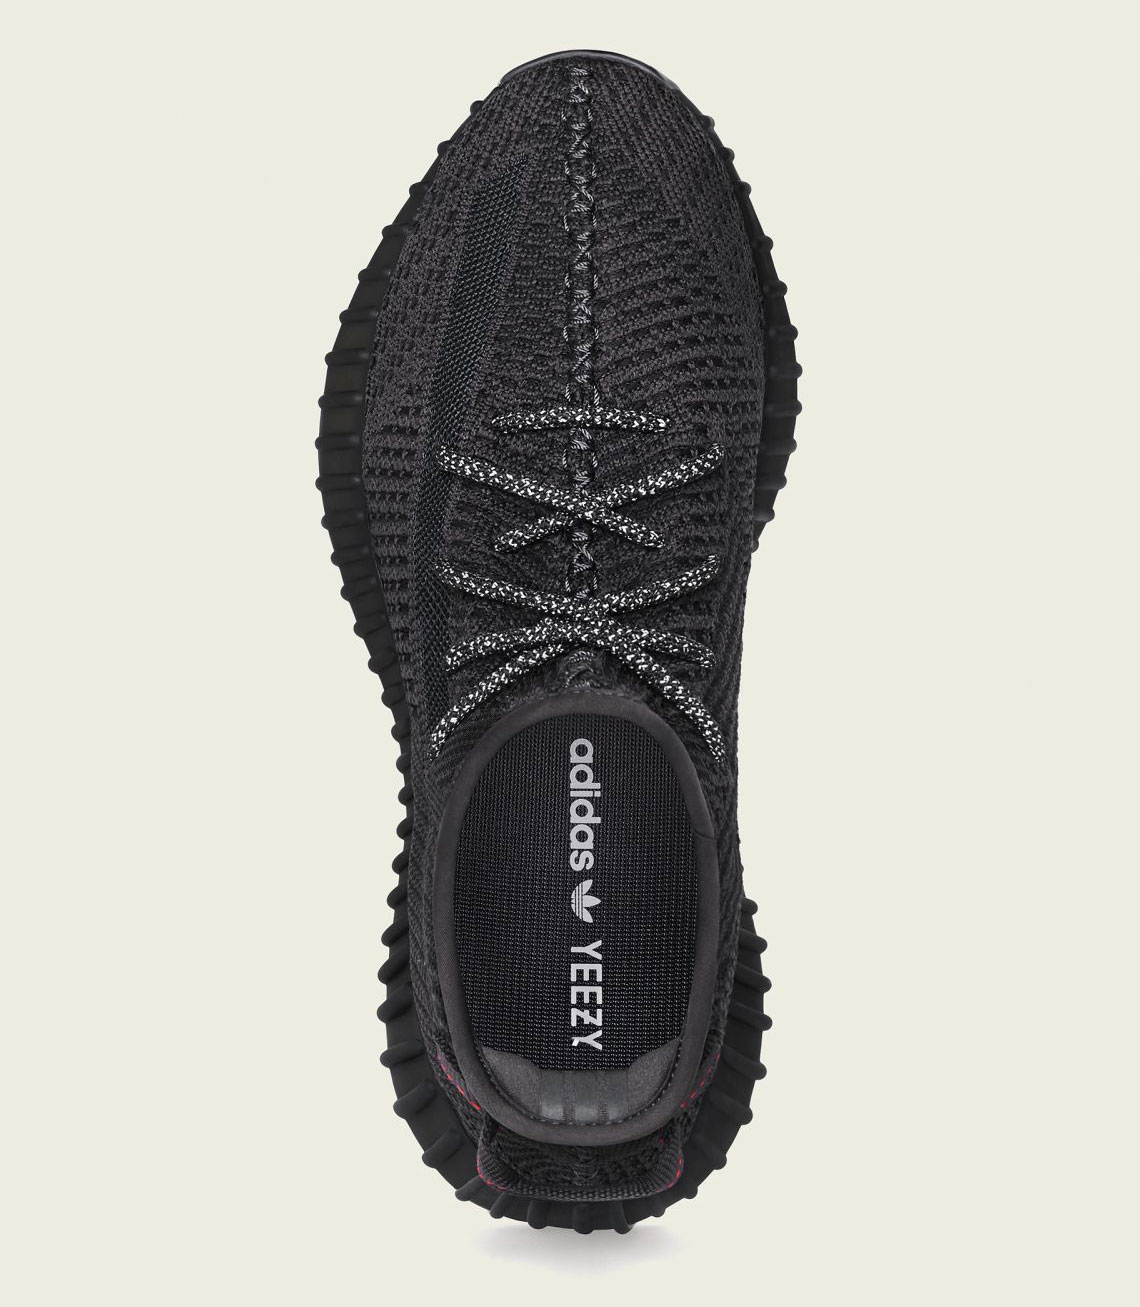 what time does the yeezy 350 v2 black drop